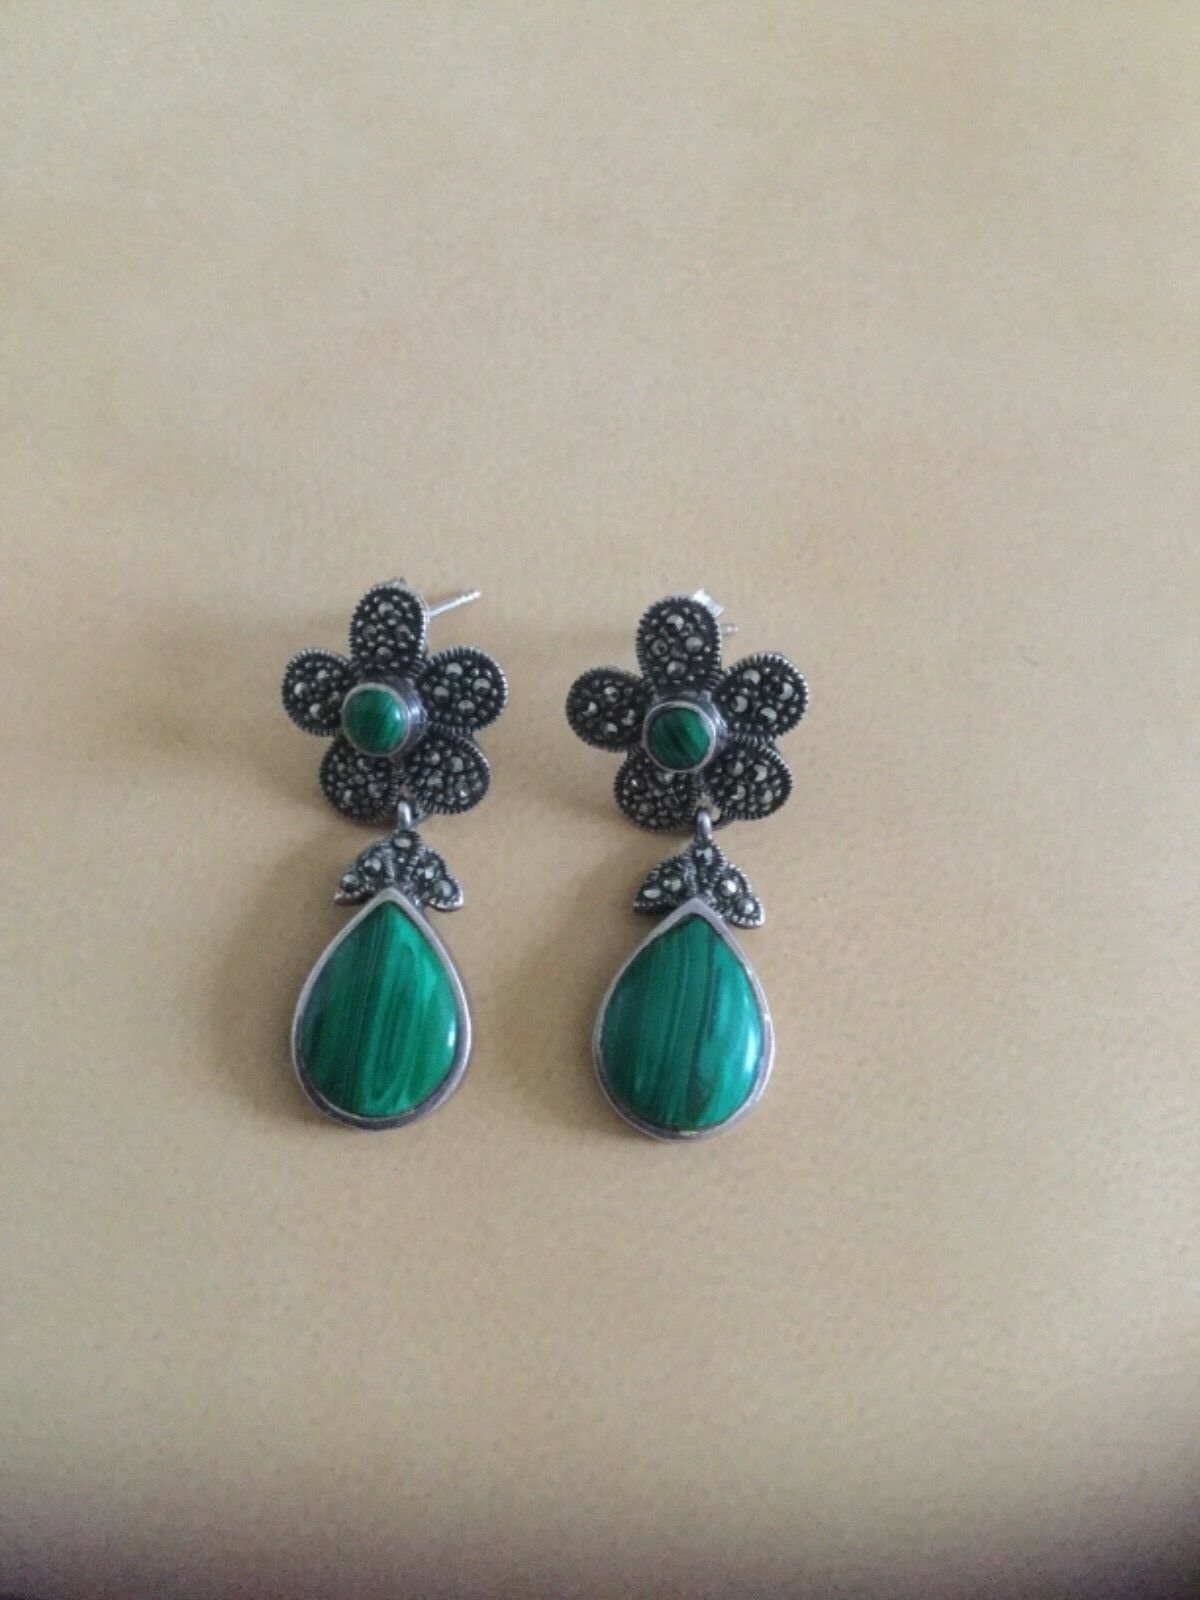 Vintage Silver Marcasite and Green Malachite Earrings - Image 3 of 5